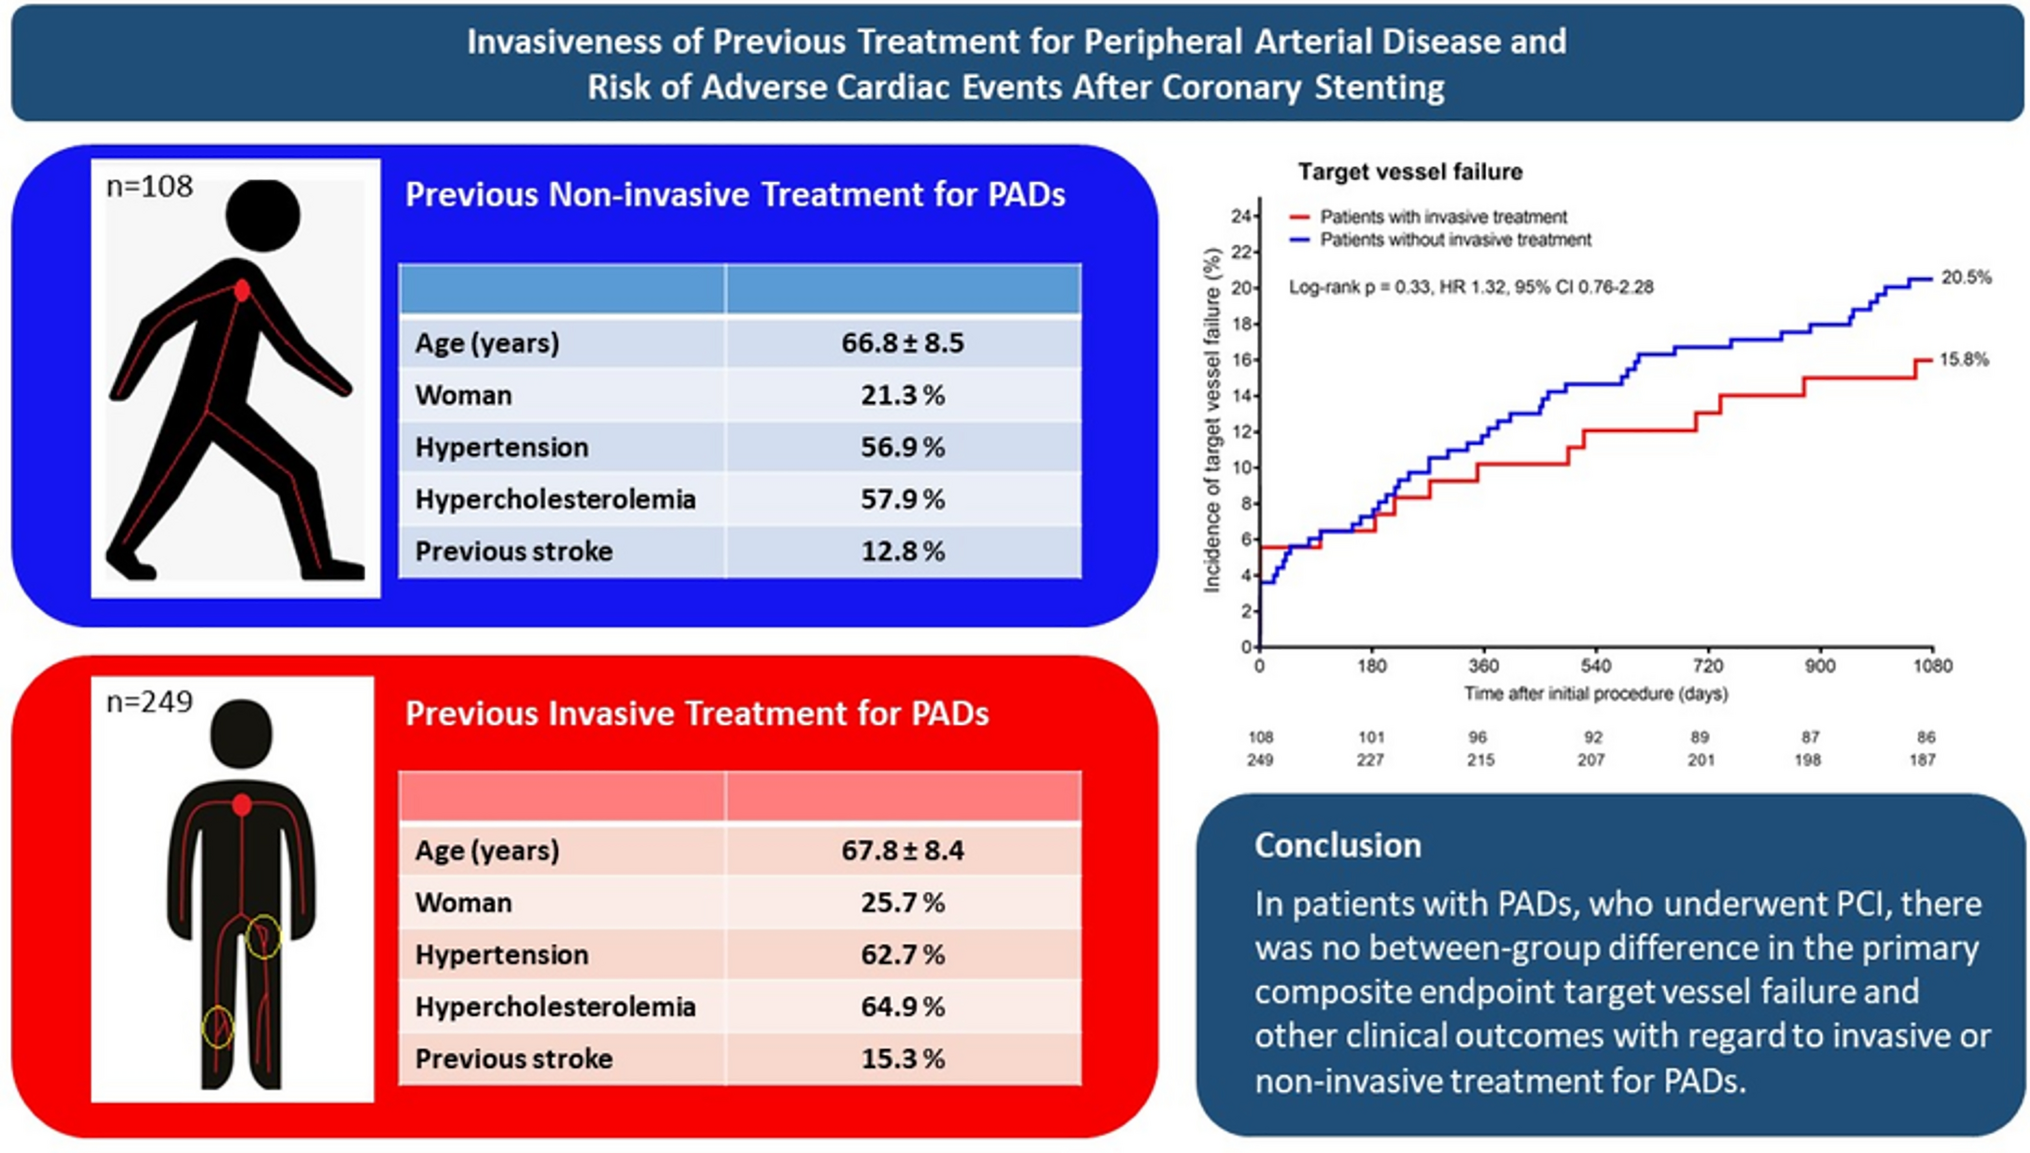 Invasiveness of previous treatment for peripheral arterial disease and risk of adverse cardiac events after coronary stenting